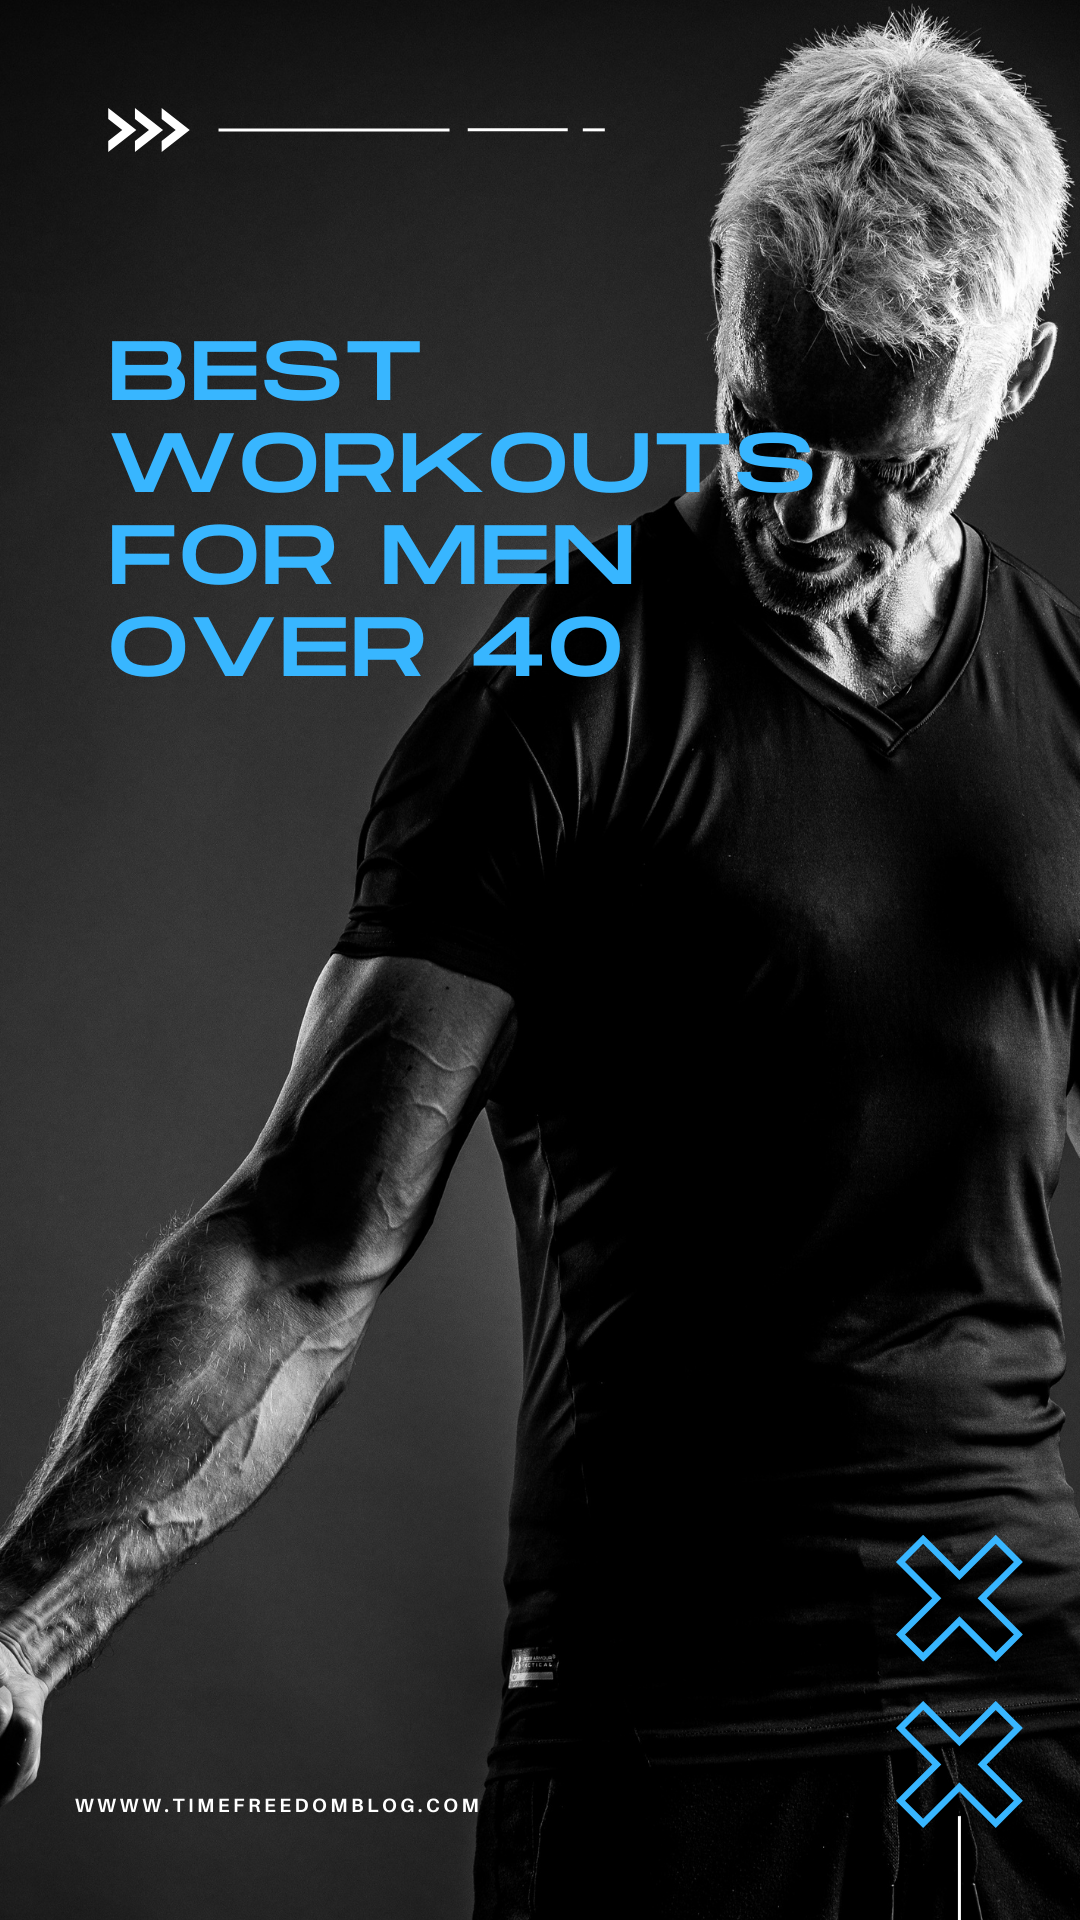 5 Best Workouts for Men Over 40